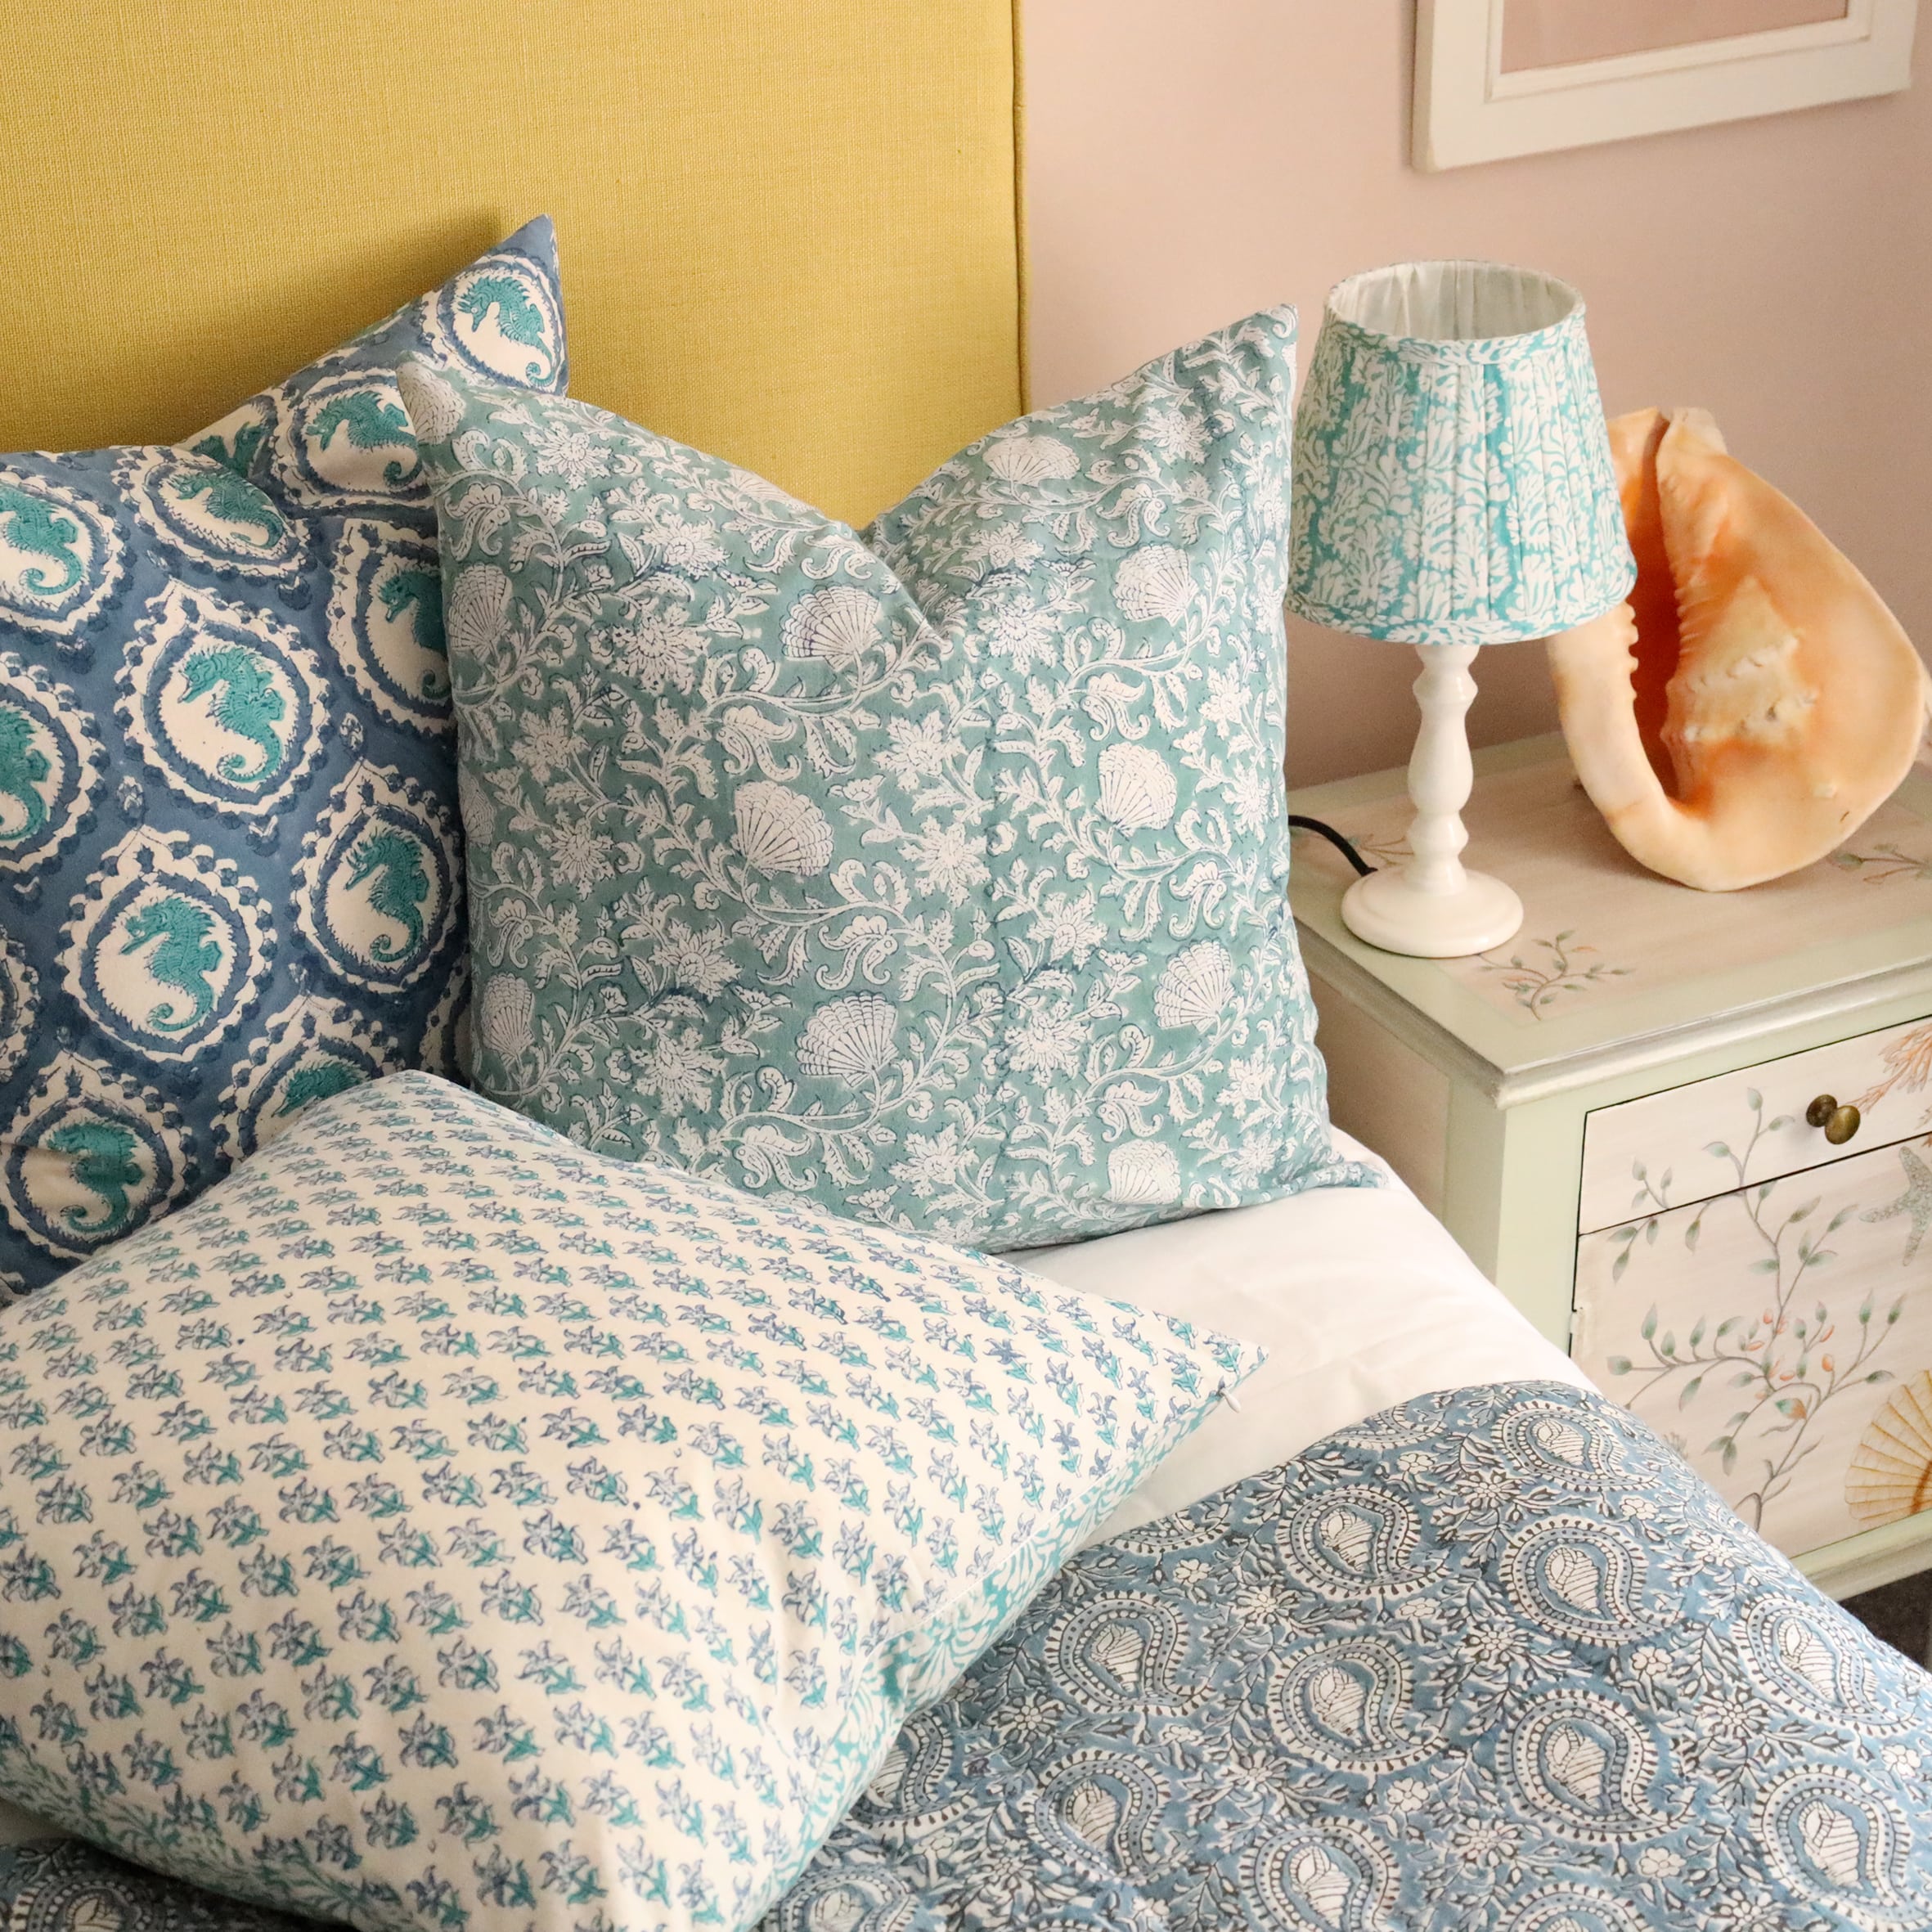 Close up of Sea Breeze Seashell Flower cushion which is Hand block printed fabric in a turquoise blue .The cushion is placed on a bed with 2 other block print cushions behind in on a crisp white bed,in front of a mustard yellow headboard.Next to the bed is a white lamp base with a pleated block print fabric lampshade on a hand painted bedside table